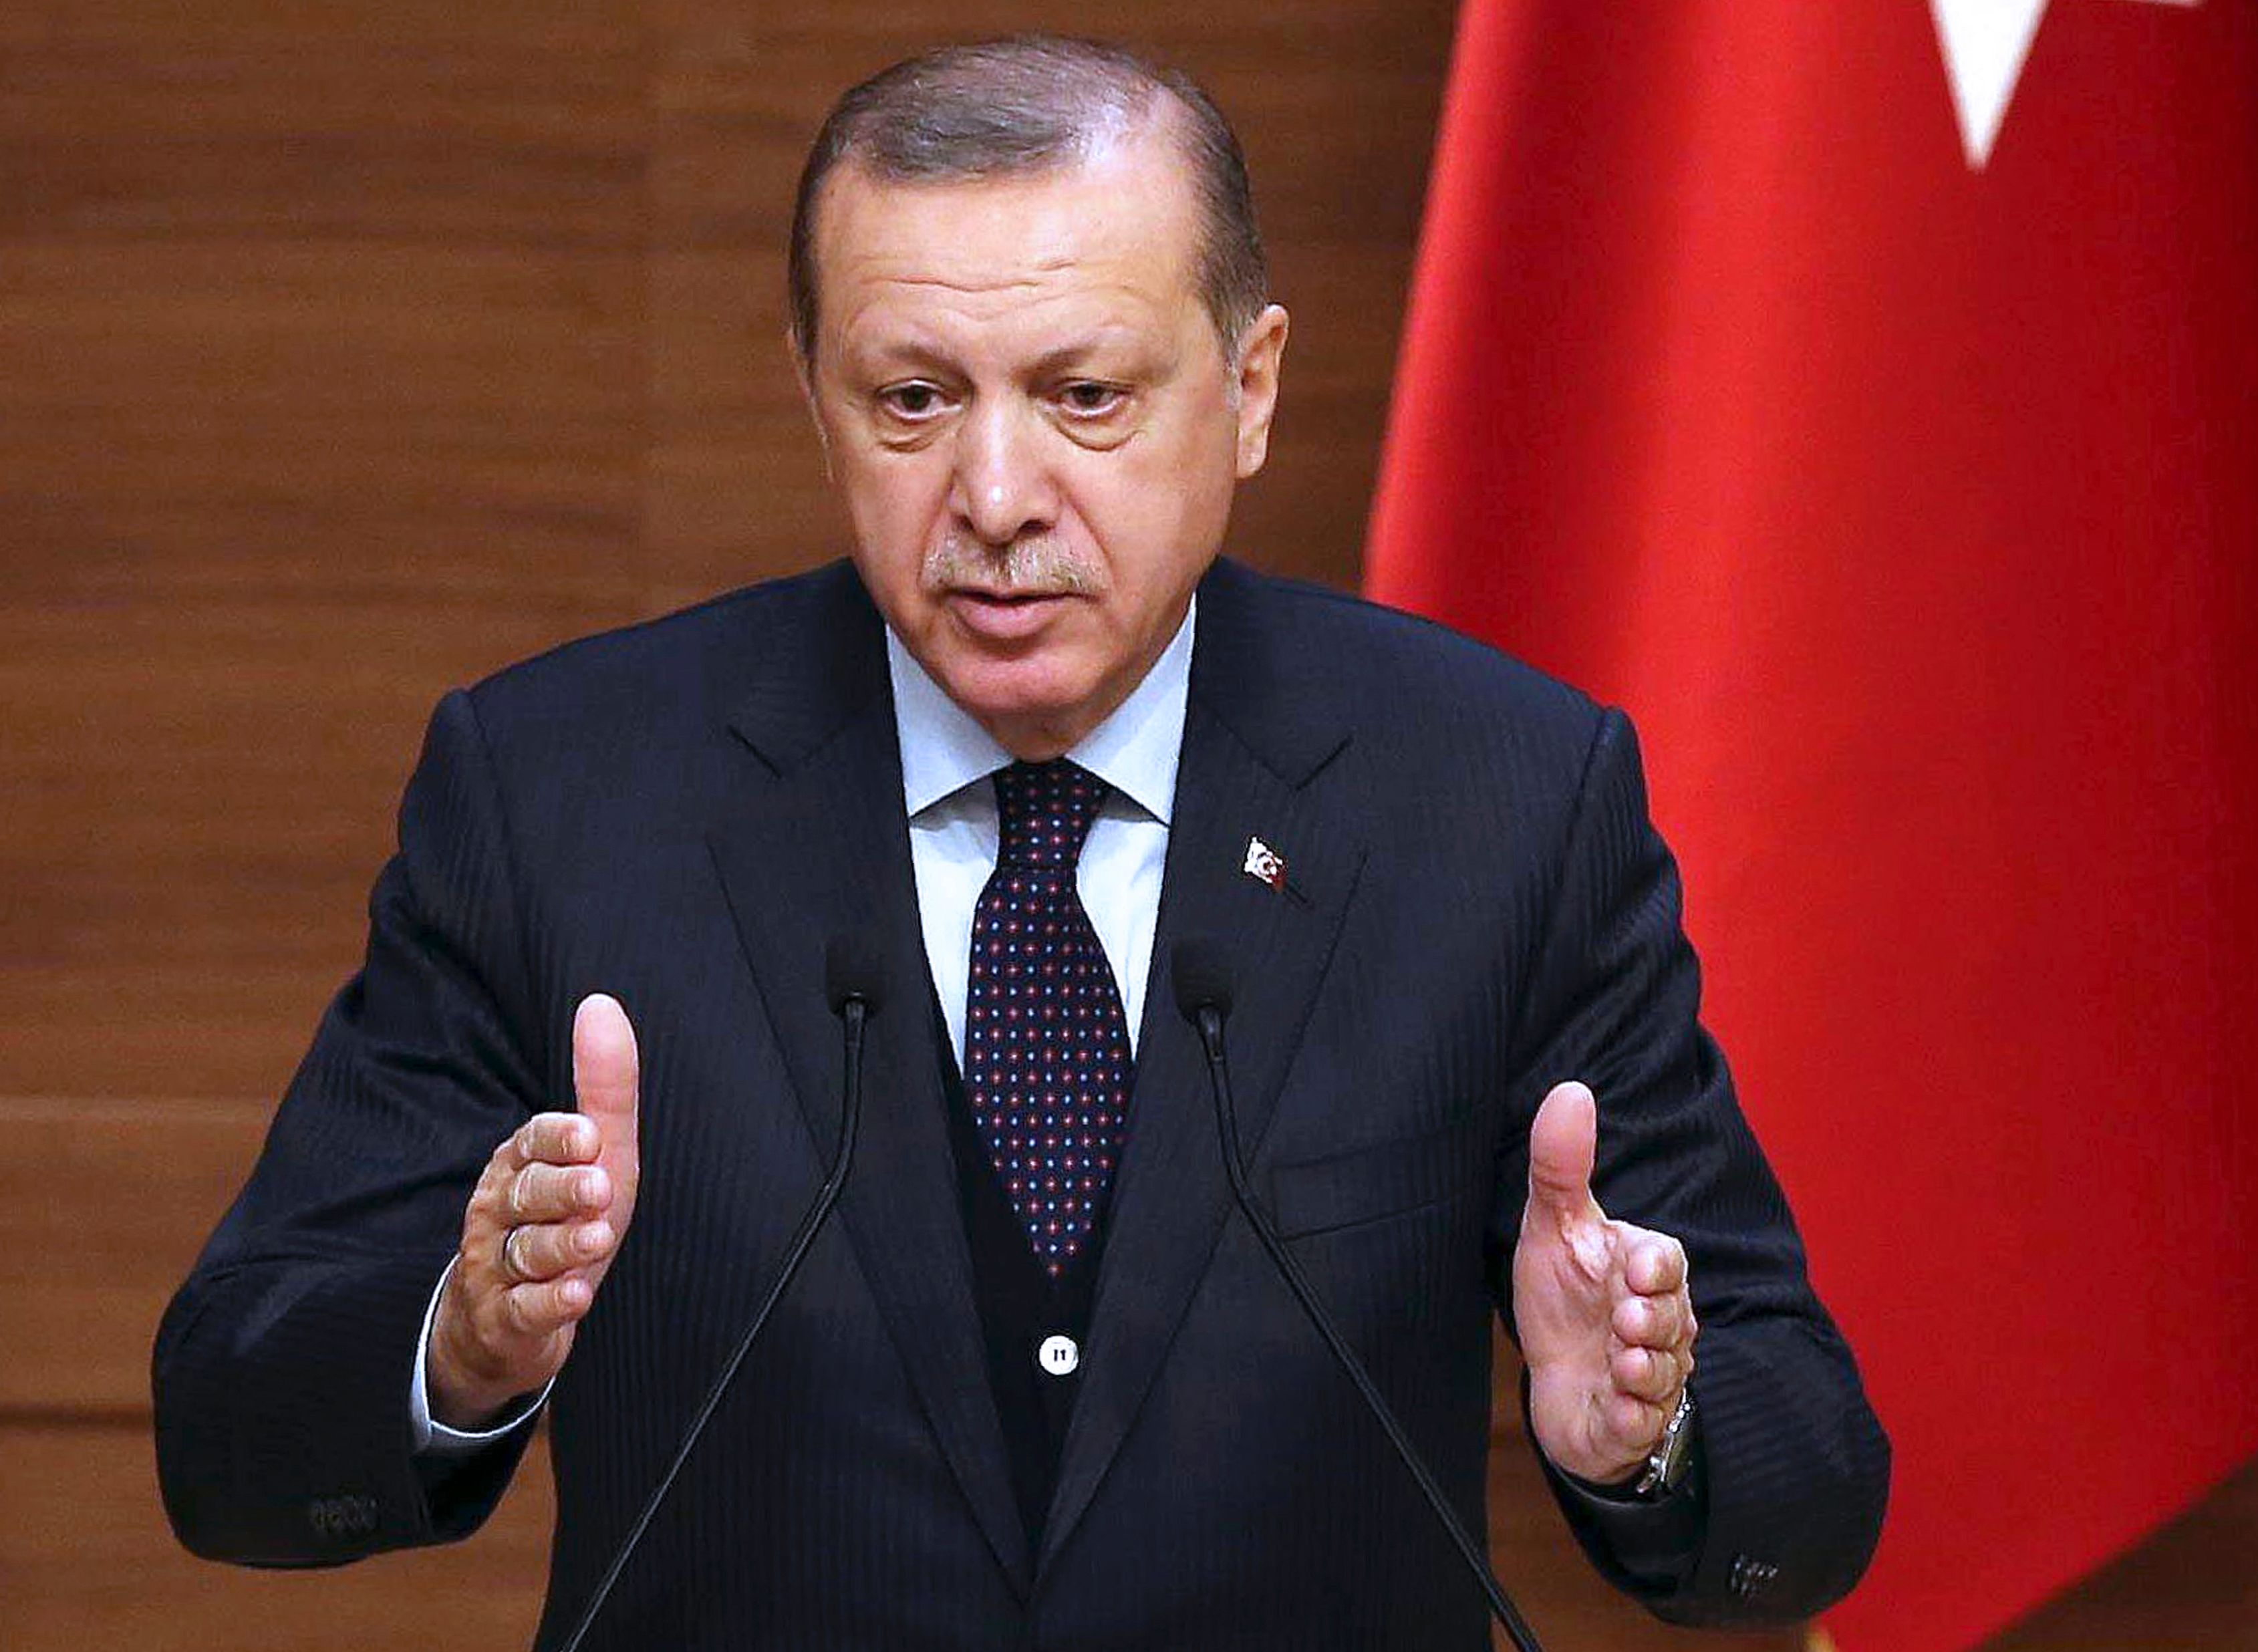 Europeans will not be able to walk safely on streets across world: Erdogan